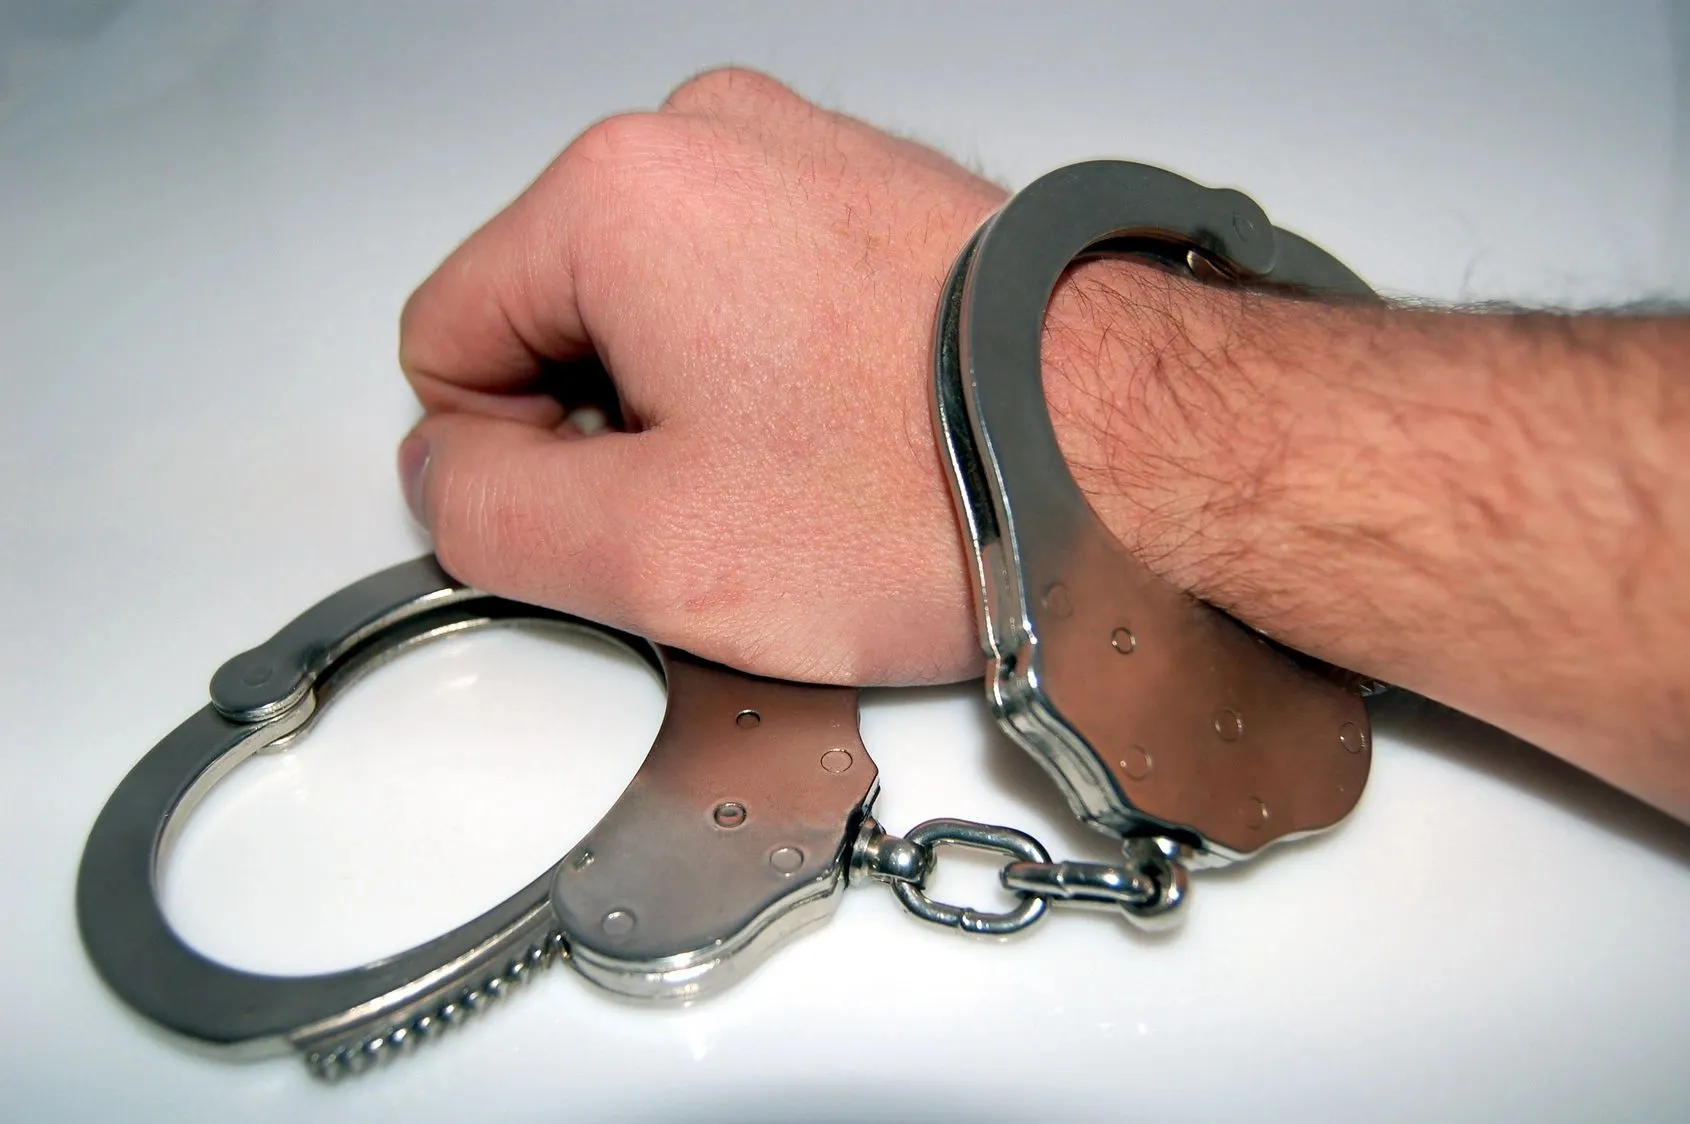 A man 's hand is holding on to some handcuffs.